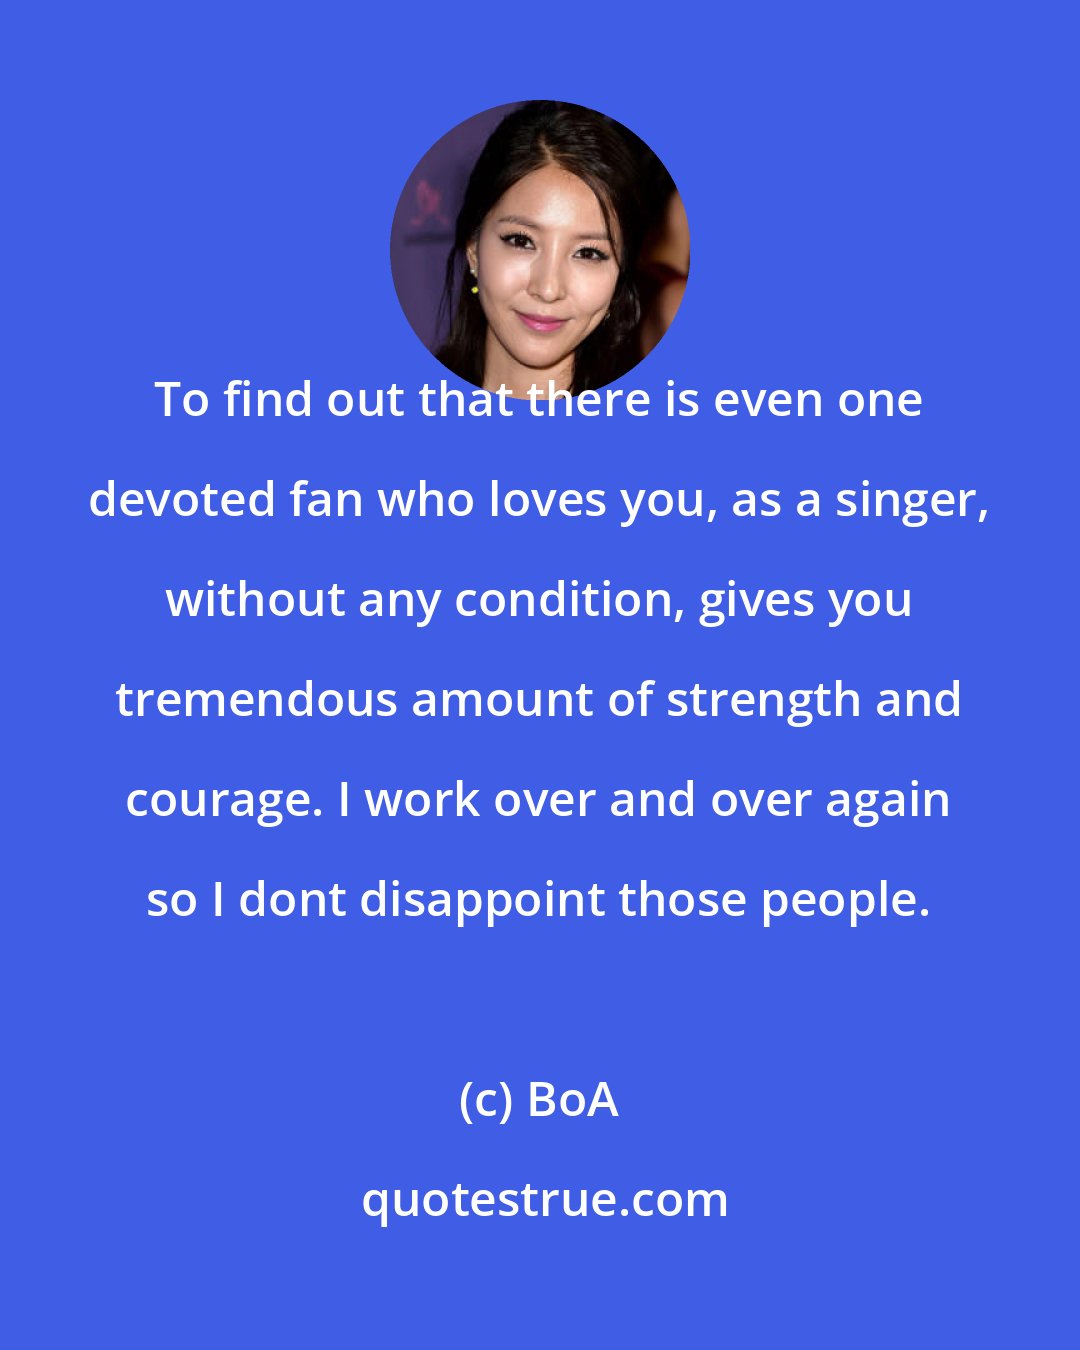 BoA: To find out that there is even one devoted fan who loves you, as a singer, without any condition, gives you tremendous amount of strength and courage. I work over and over again so I dont disappoint those people.